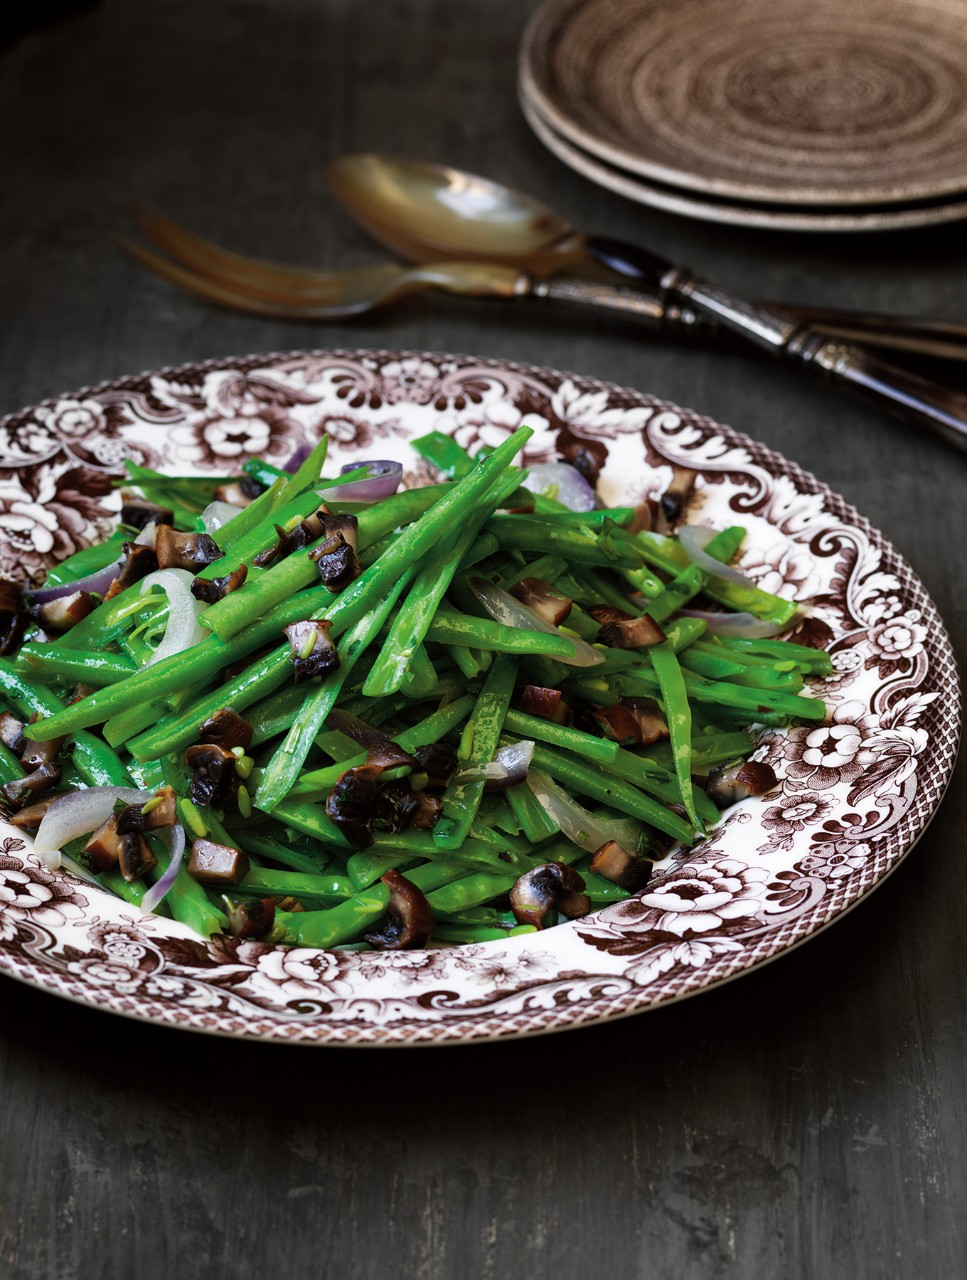 Frenched Green Beans and Snow Peas